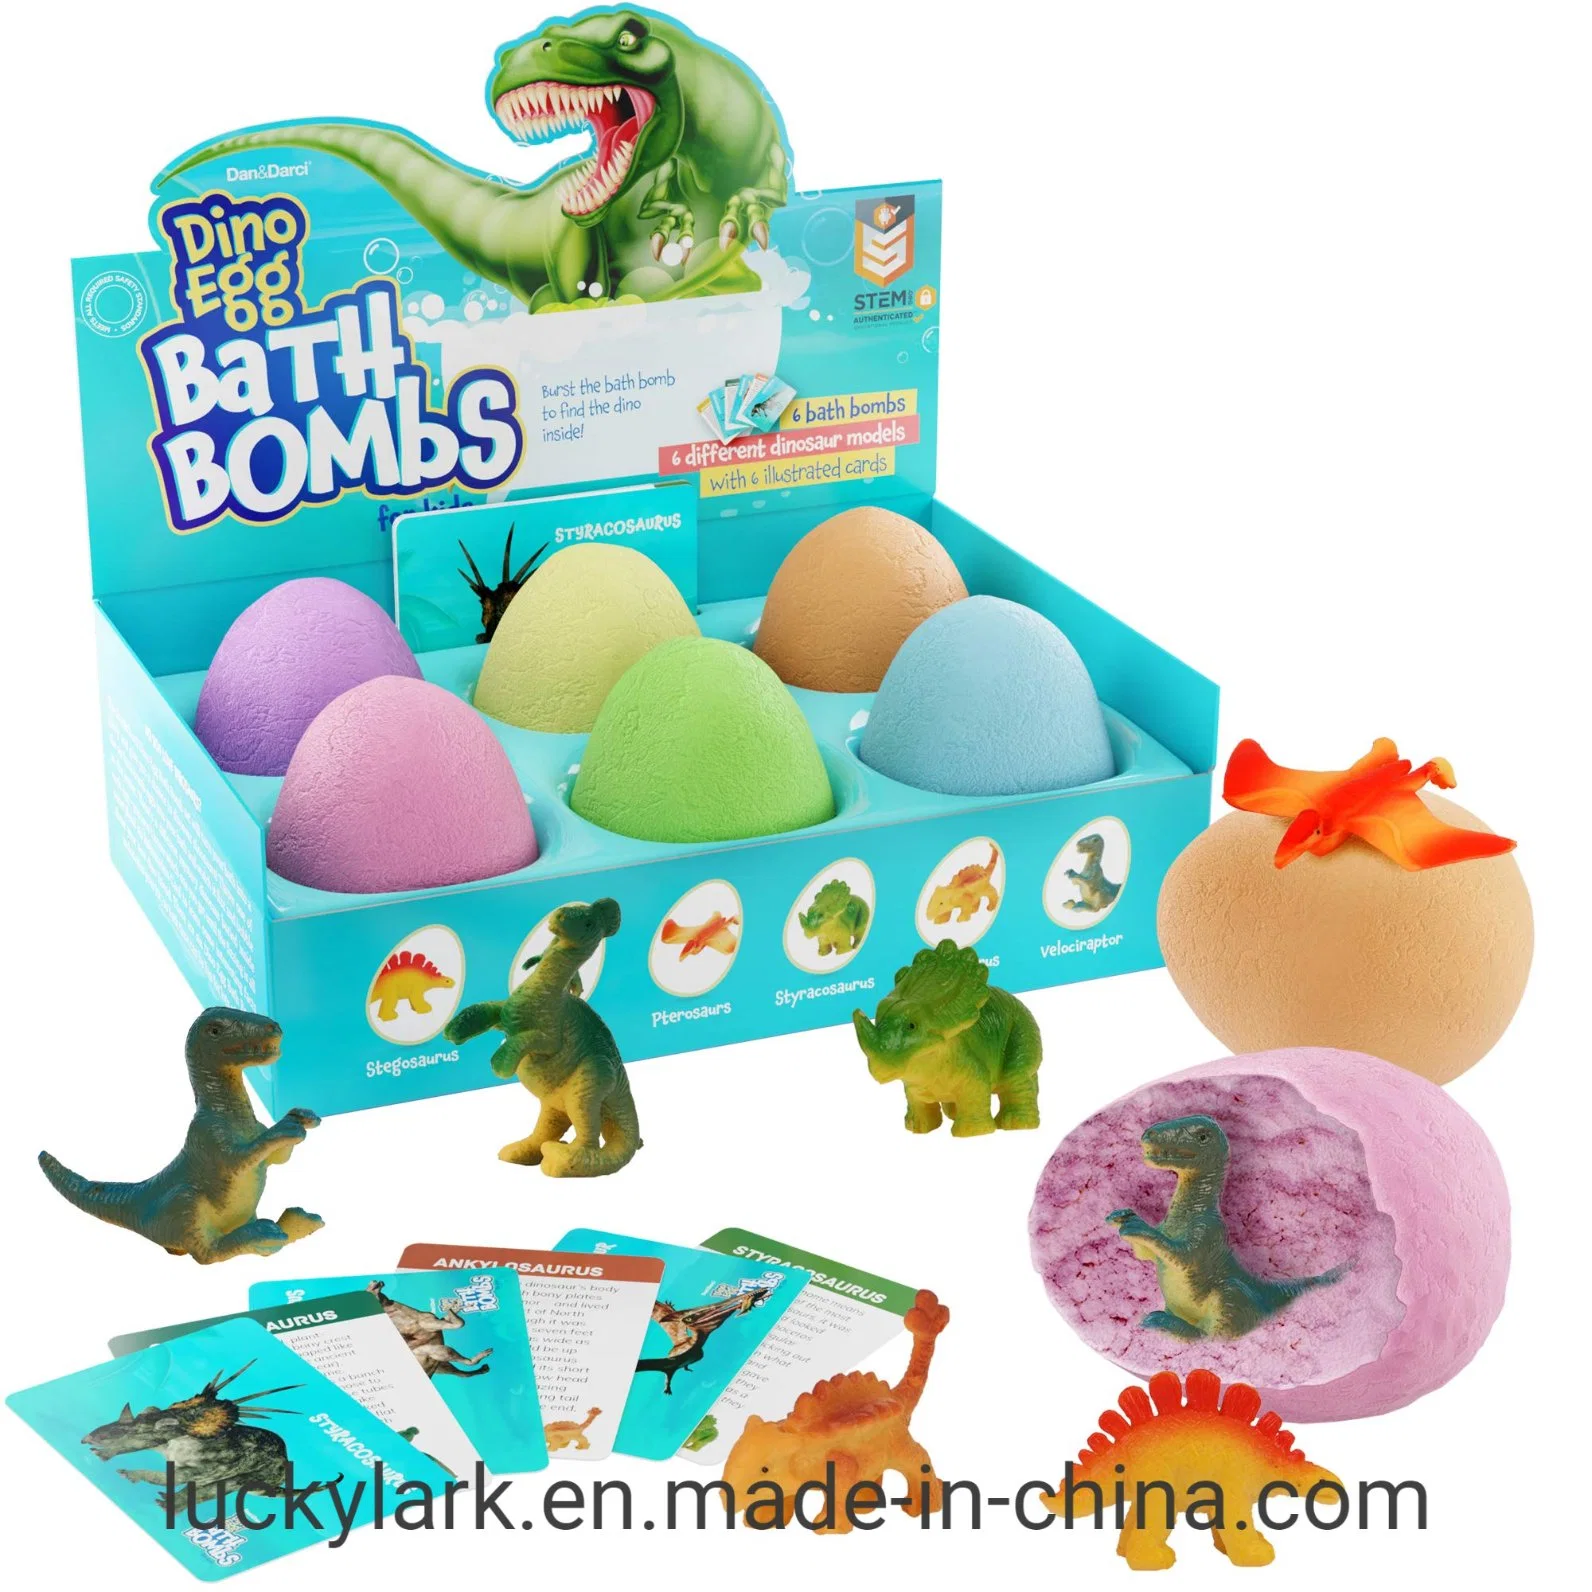 Kids Bath Bomb with Surprise Inside Dinosaur Toys Gift for Boys and Girls Easter Toy Kid Gifts - Fun Educational Bath Toys